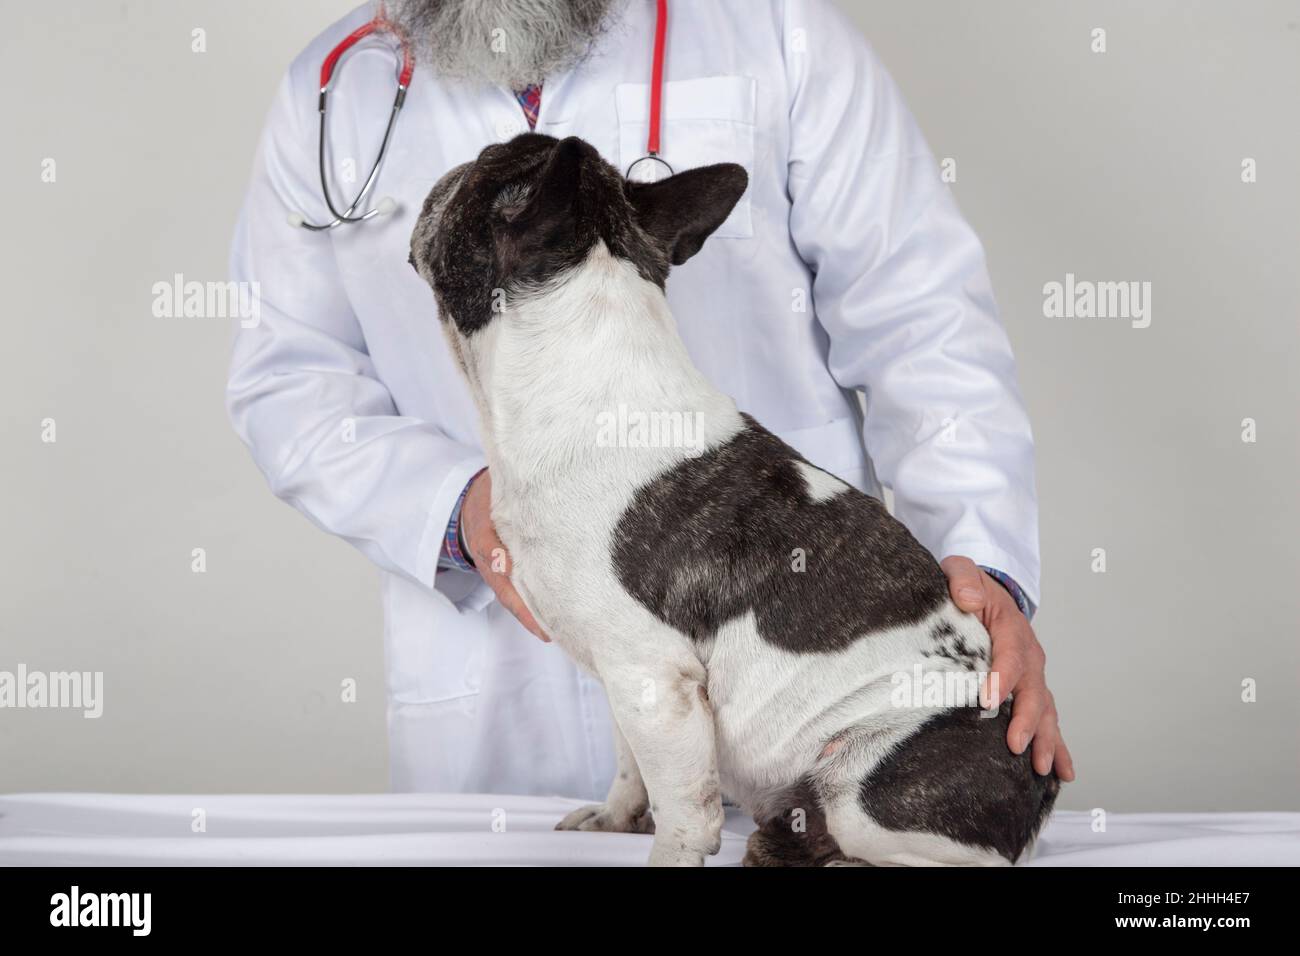 Veterinarian examining a dog on a white background Stock Photo